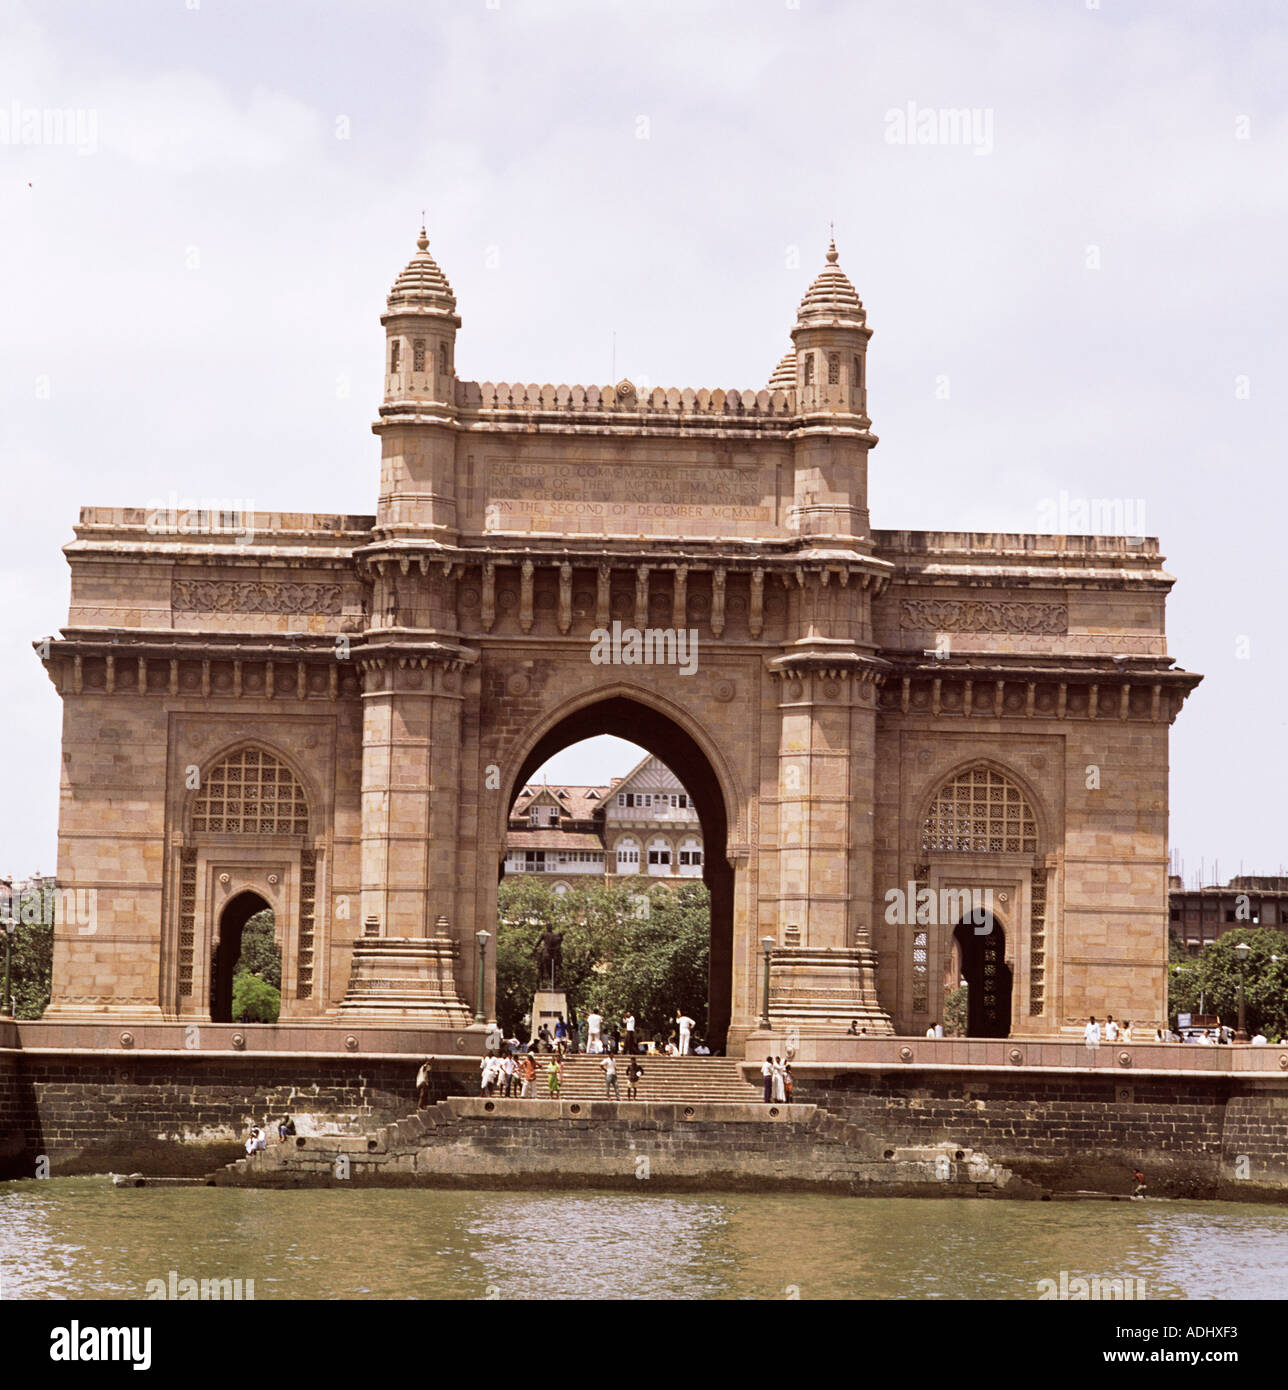 The Gateway of India Bombay Mumbai built for George Vs 1911 visit to India Beyond it teems a city thirsting for gold Stock Photo